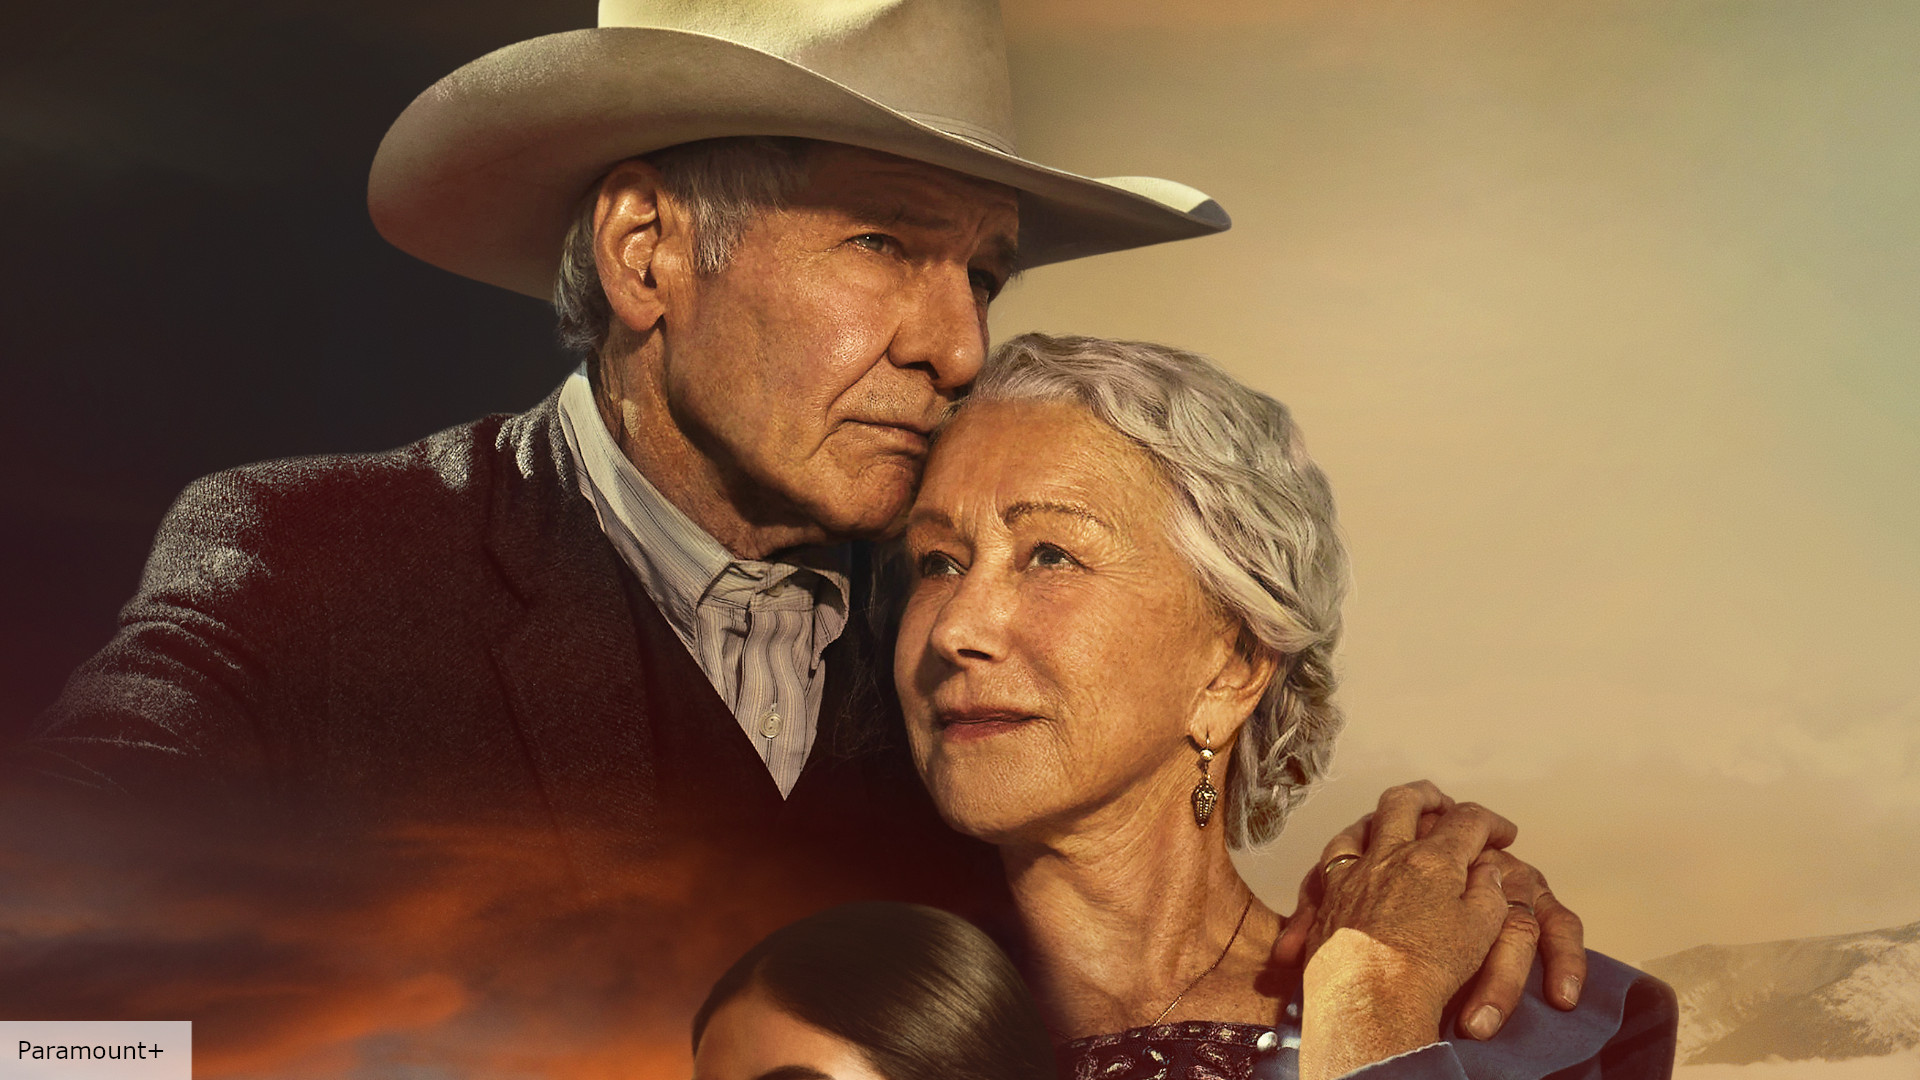 Yellowstone 1923 Season 2: The Next Chapter in the Dutton Legacy